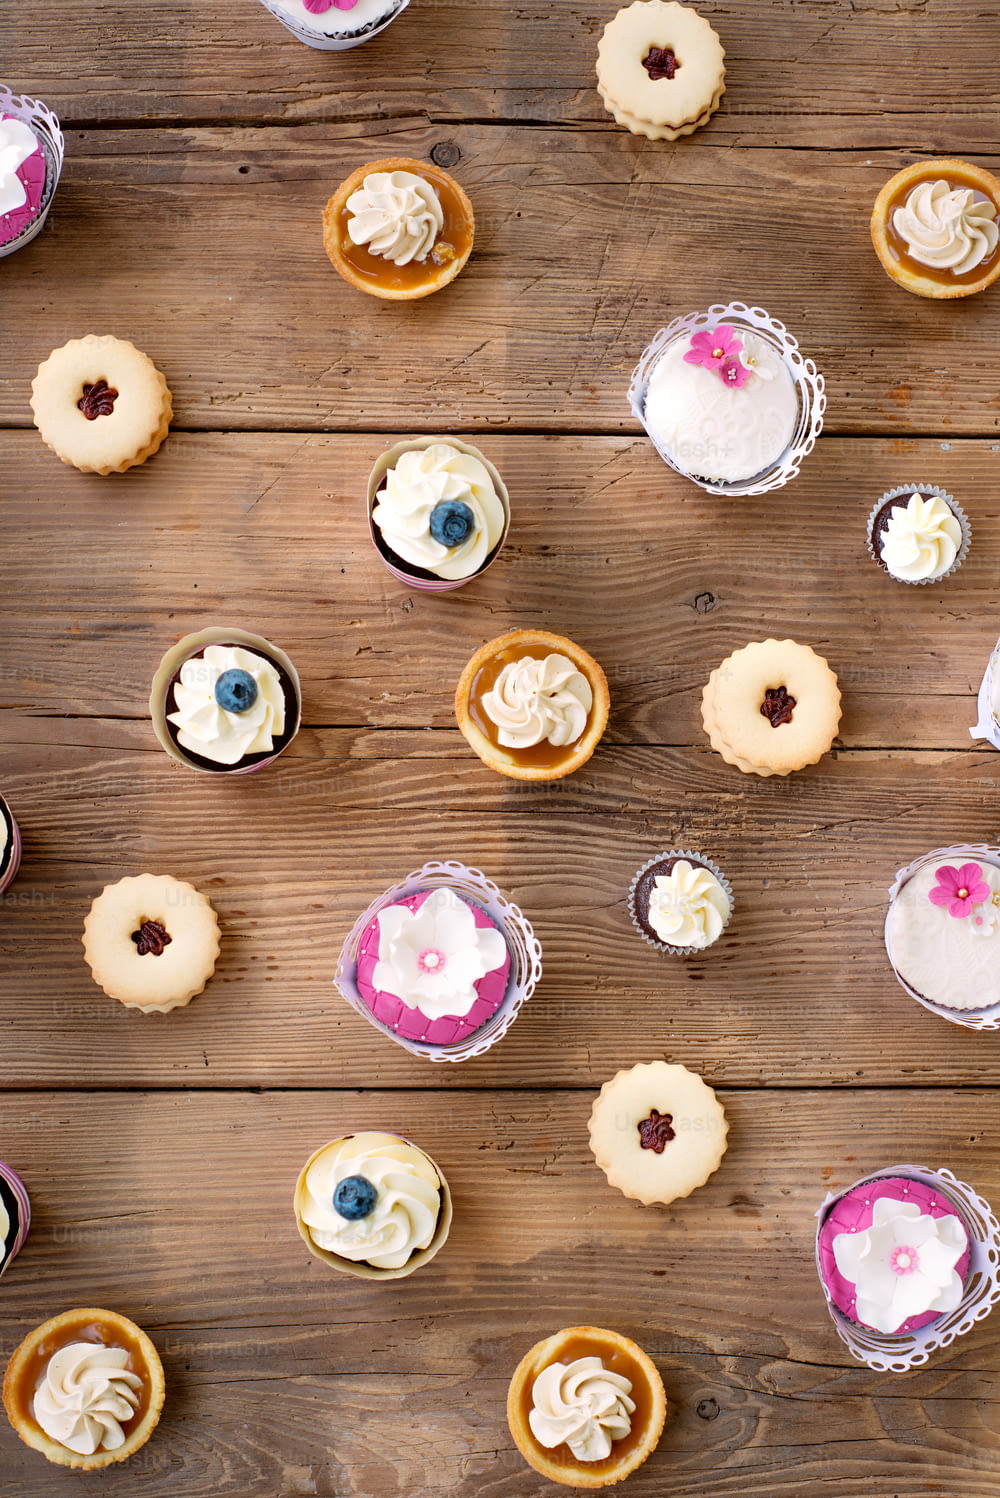 Table with various cupcakes, tarts and cookies. Studio shot on brown wooden background. Flat lay.